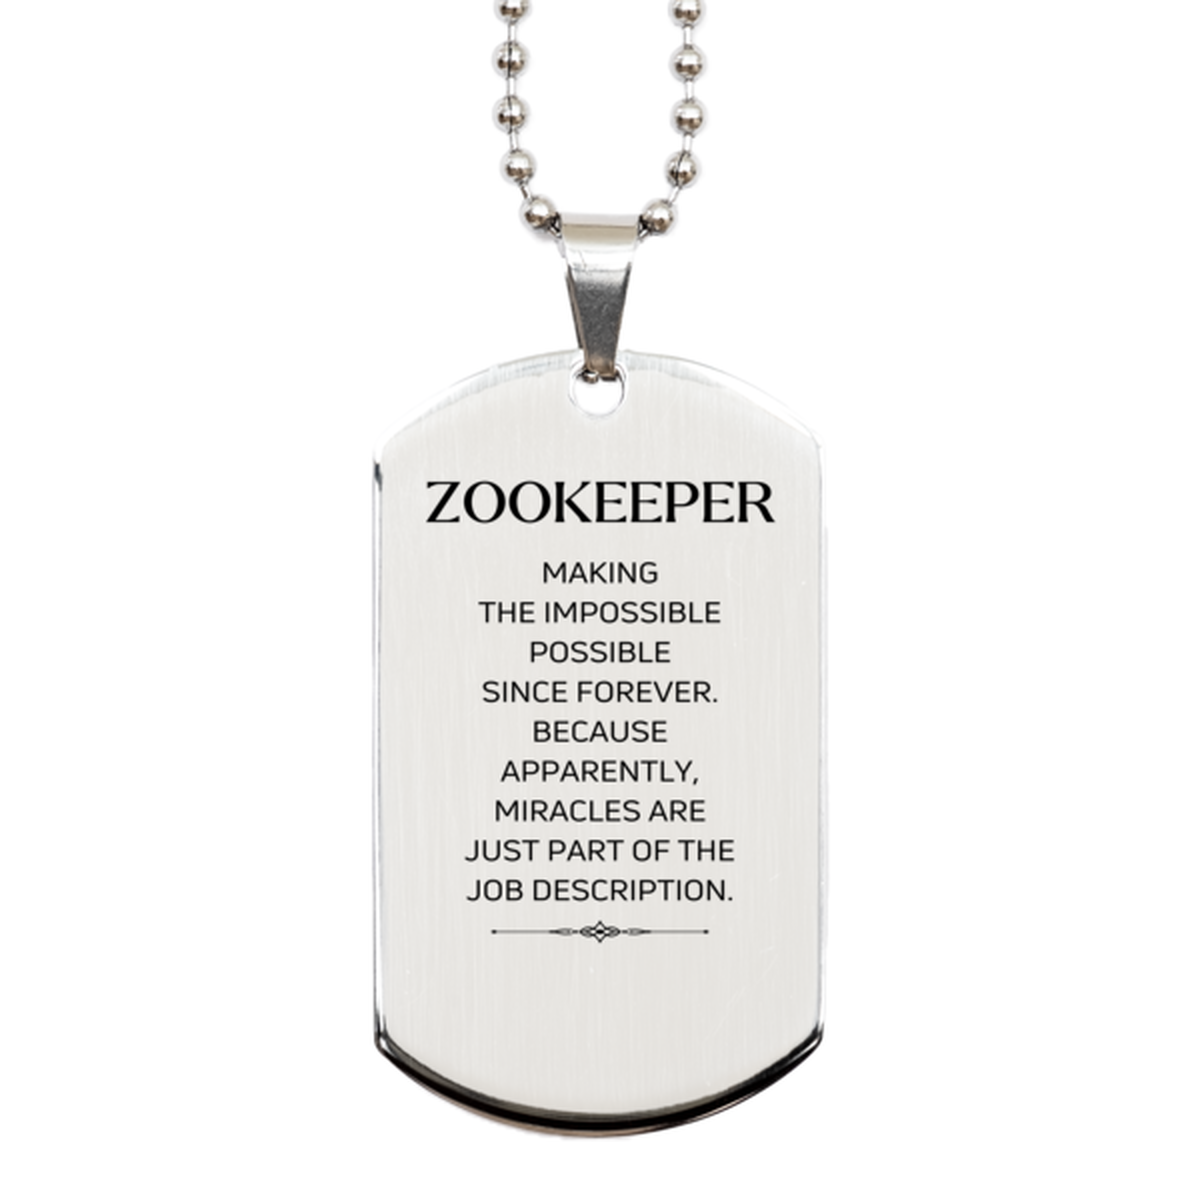 Funny Zookeeper Gifts, Miracles are just part of the job description, Inspirational Birthday Silver Dog Tag For Zookeeper, Men, Women, Coworkers, Friends, Boss